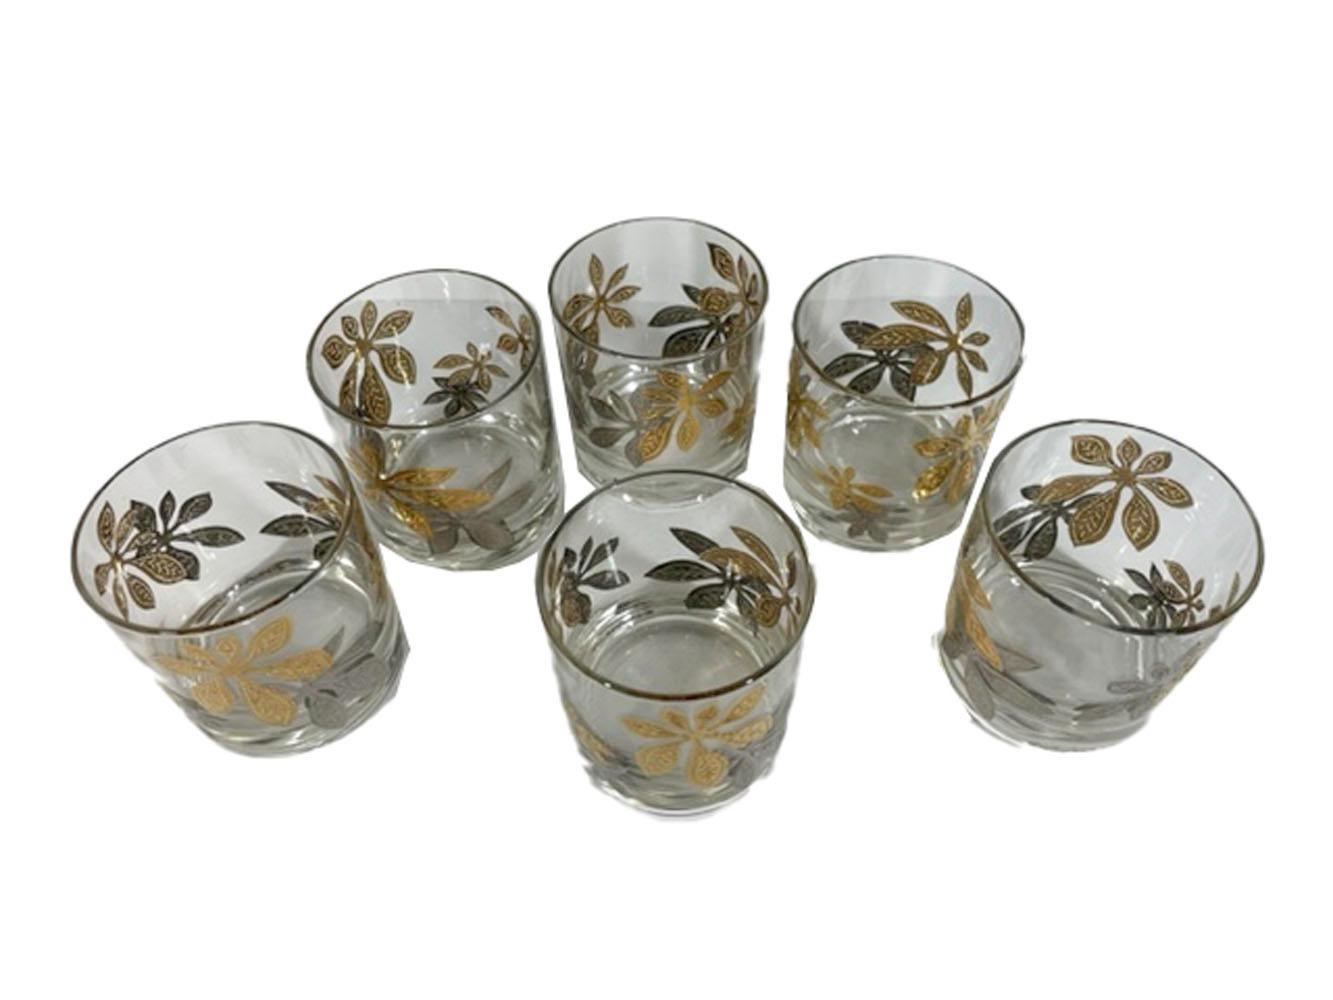 Sic Mid-Century Modern rocks glasses by Culver, LTD. decorated with 22k gold and silver clusters of leaves.